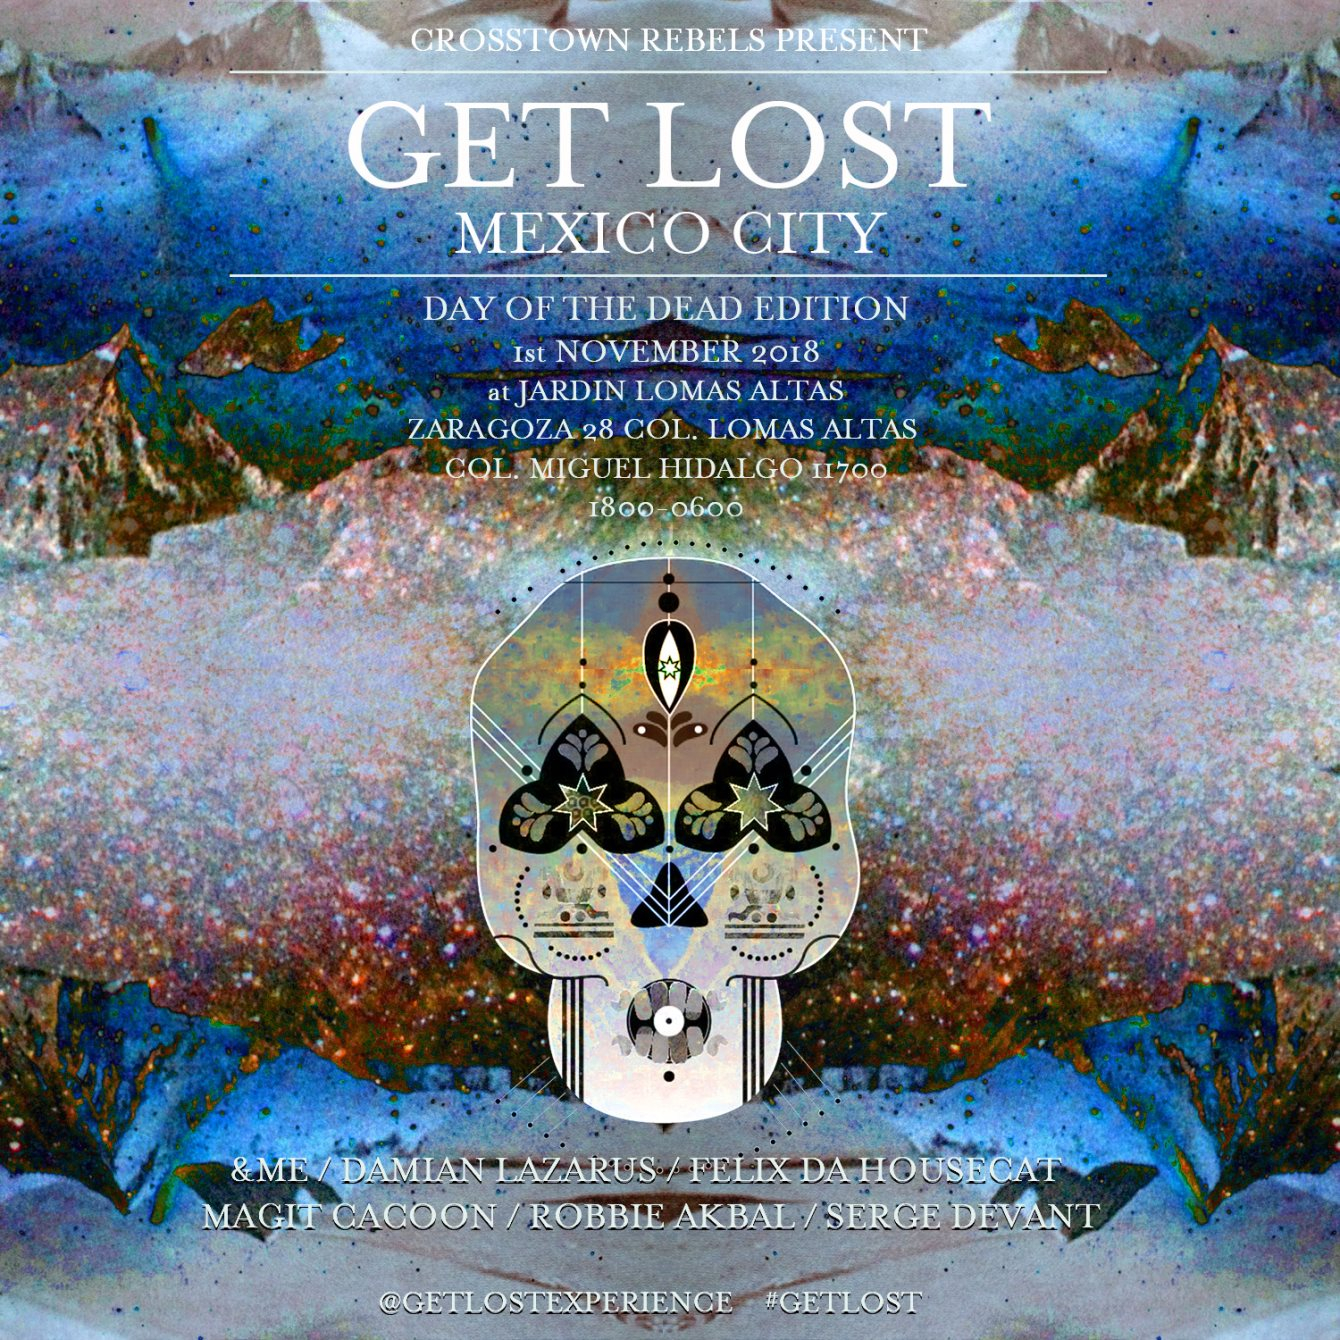 Get Lost Mexico City 2018 - Flyer front